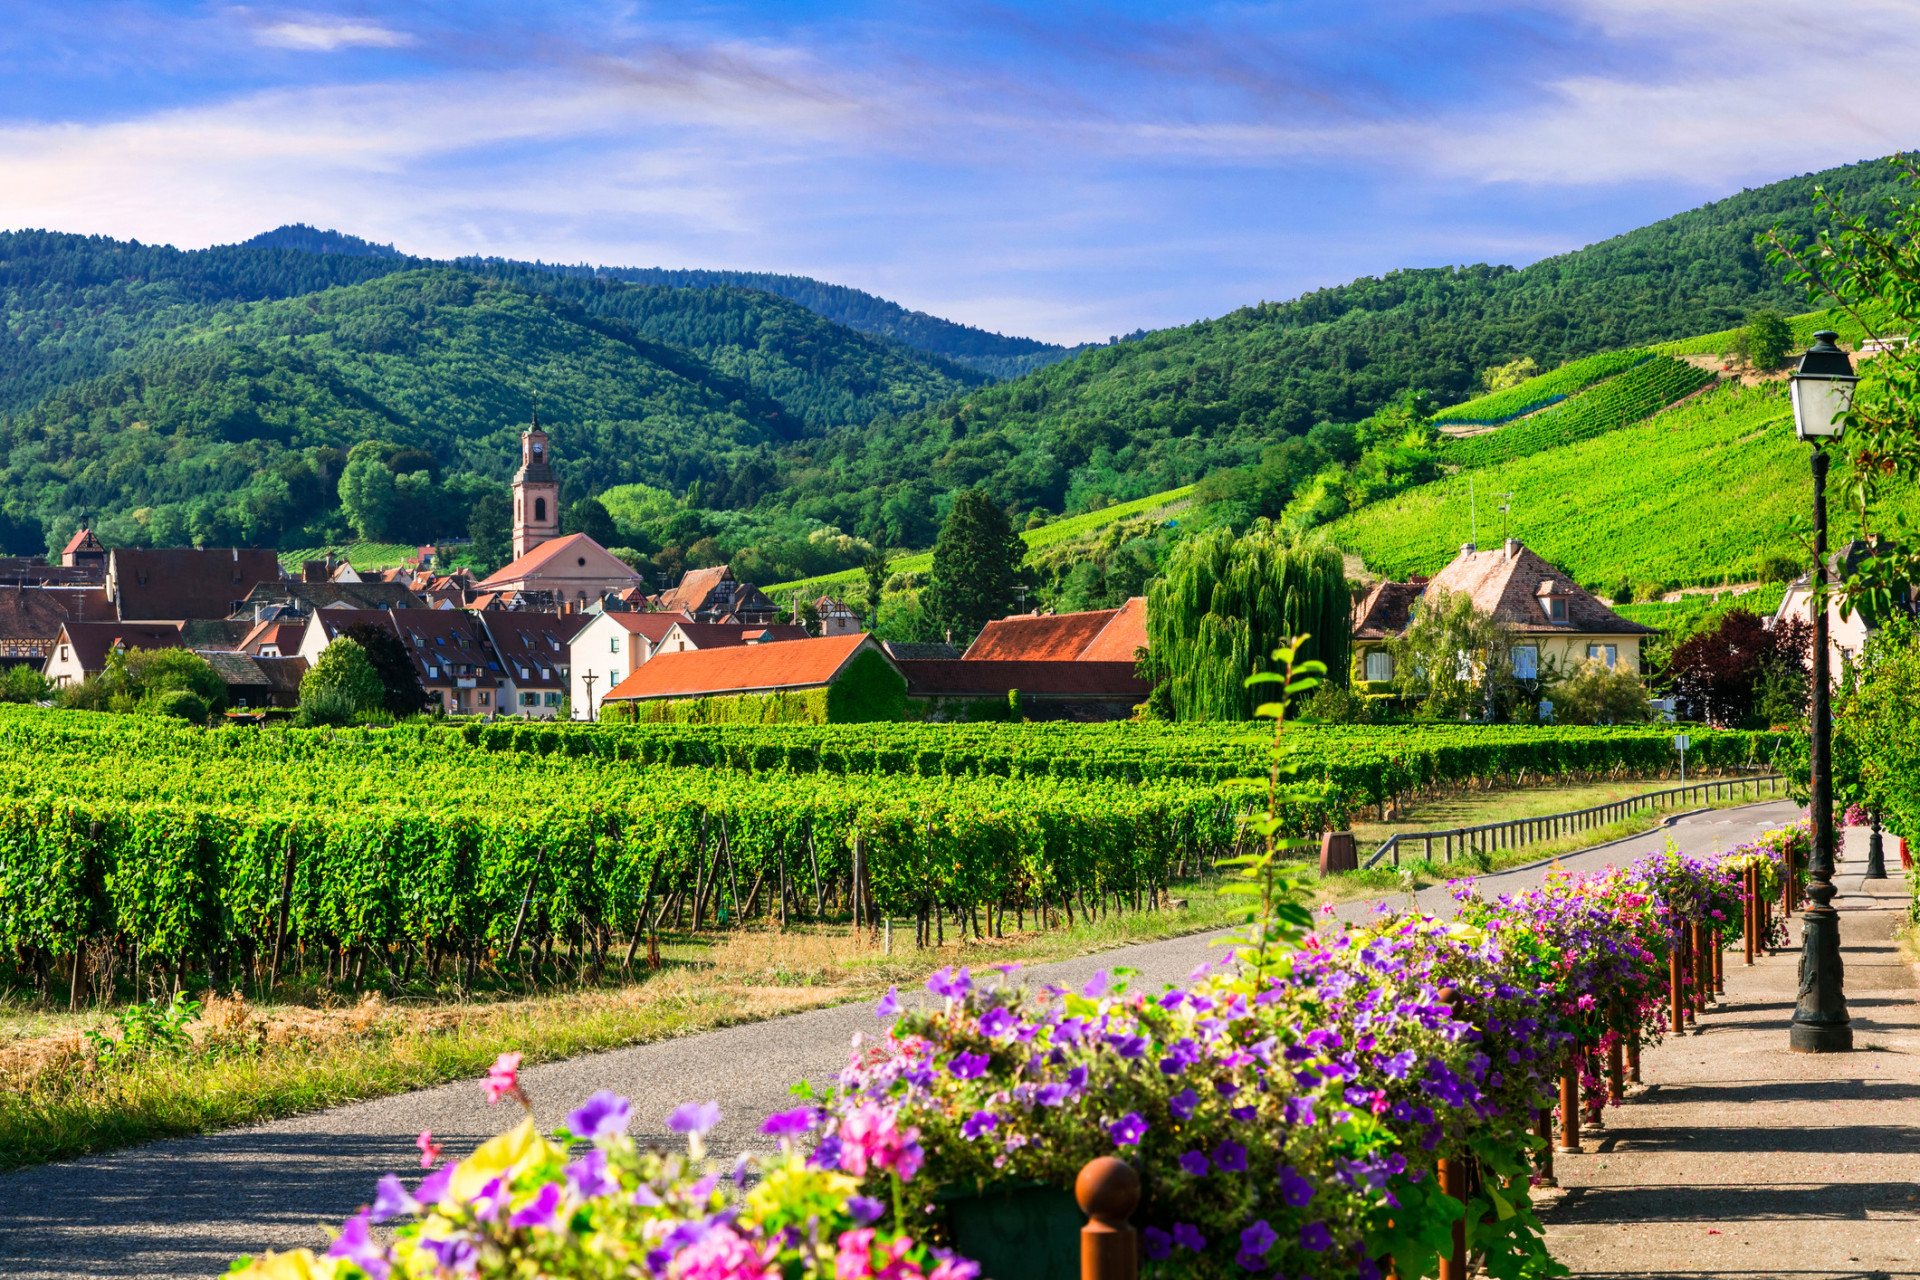 The Alsace Wine Route is one of the oldest wine routes in the country. Grape varieties grown in the region include Muscat, Pinot Noir, and Gewurztraminer.<p><a href="https://www.msn.com/en-us/community/channel/vid-7xx8mnucu55yw63we9va2gwr7uihbxwc68fxqp25x6tg4ftibpra?cvid=94631541bc0f4f89bfd59158d696ad7e">Follow us and access great exclusive content every day</a></p>